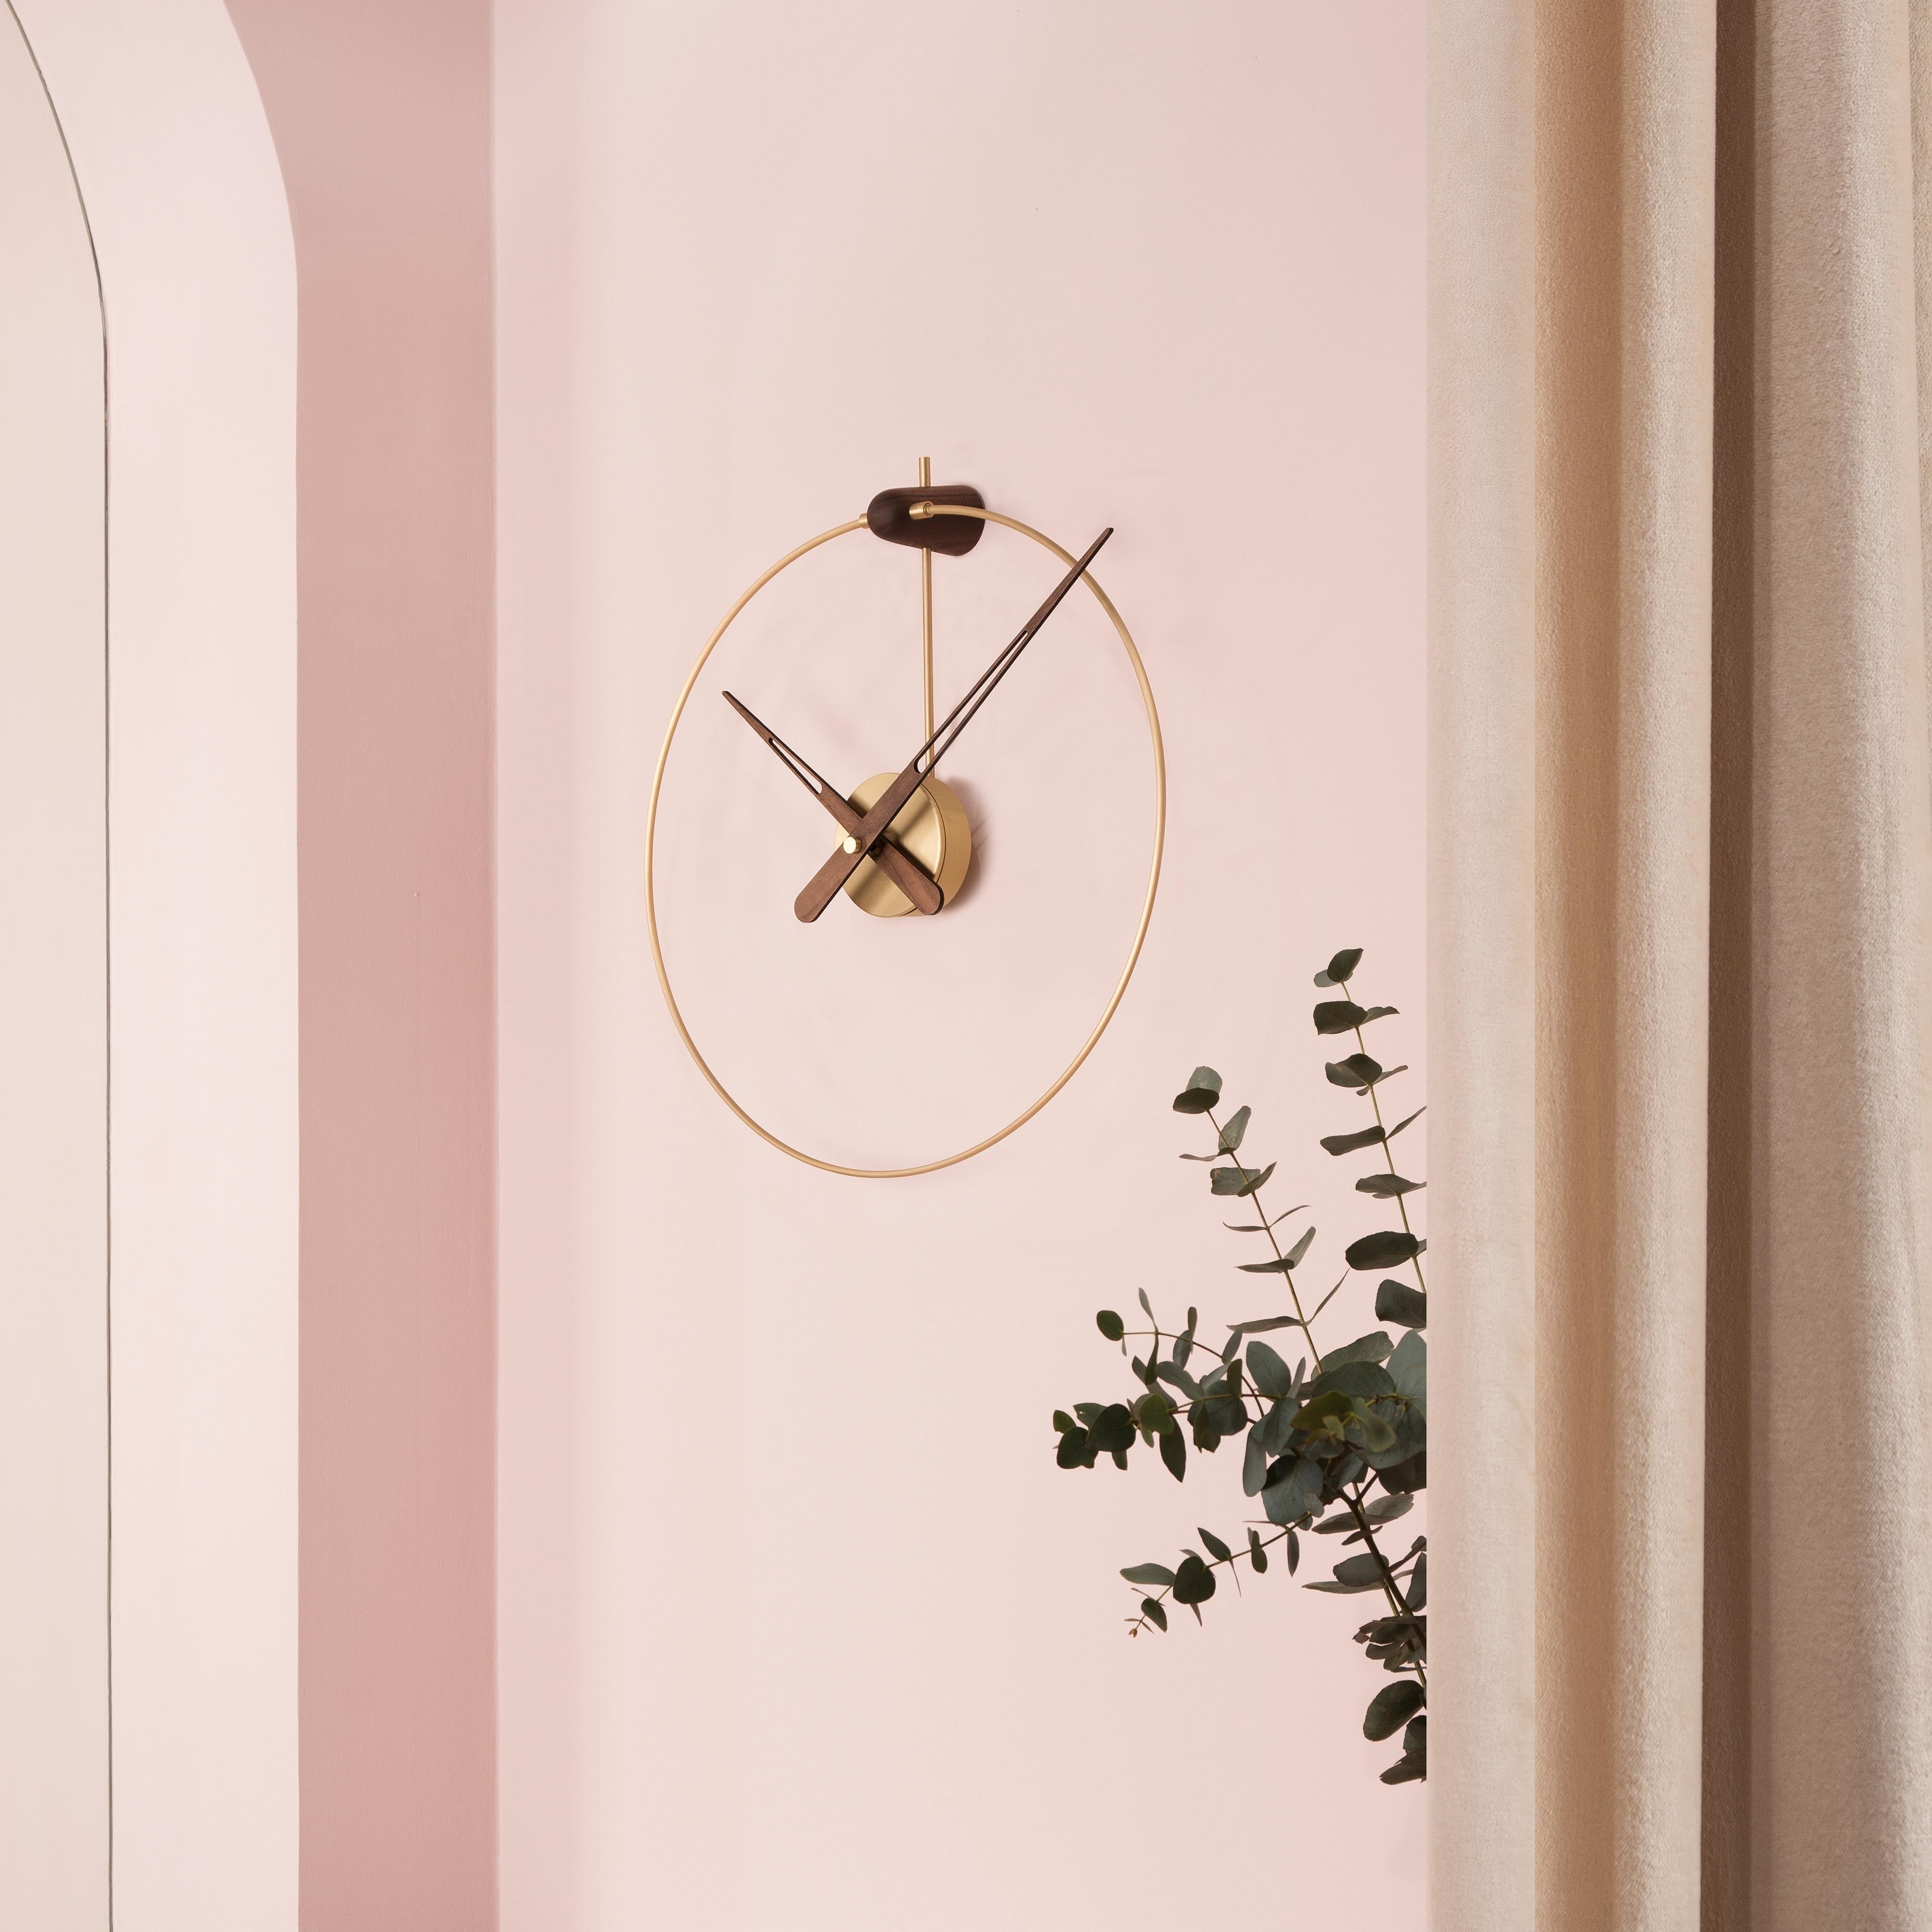 You have probably valued buying an avant-garde wall clock model but have not found enough information to be able to value it. This wall clock is part of the Nomon lacquered wood collection.

It is one of the best models you can get in the market.